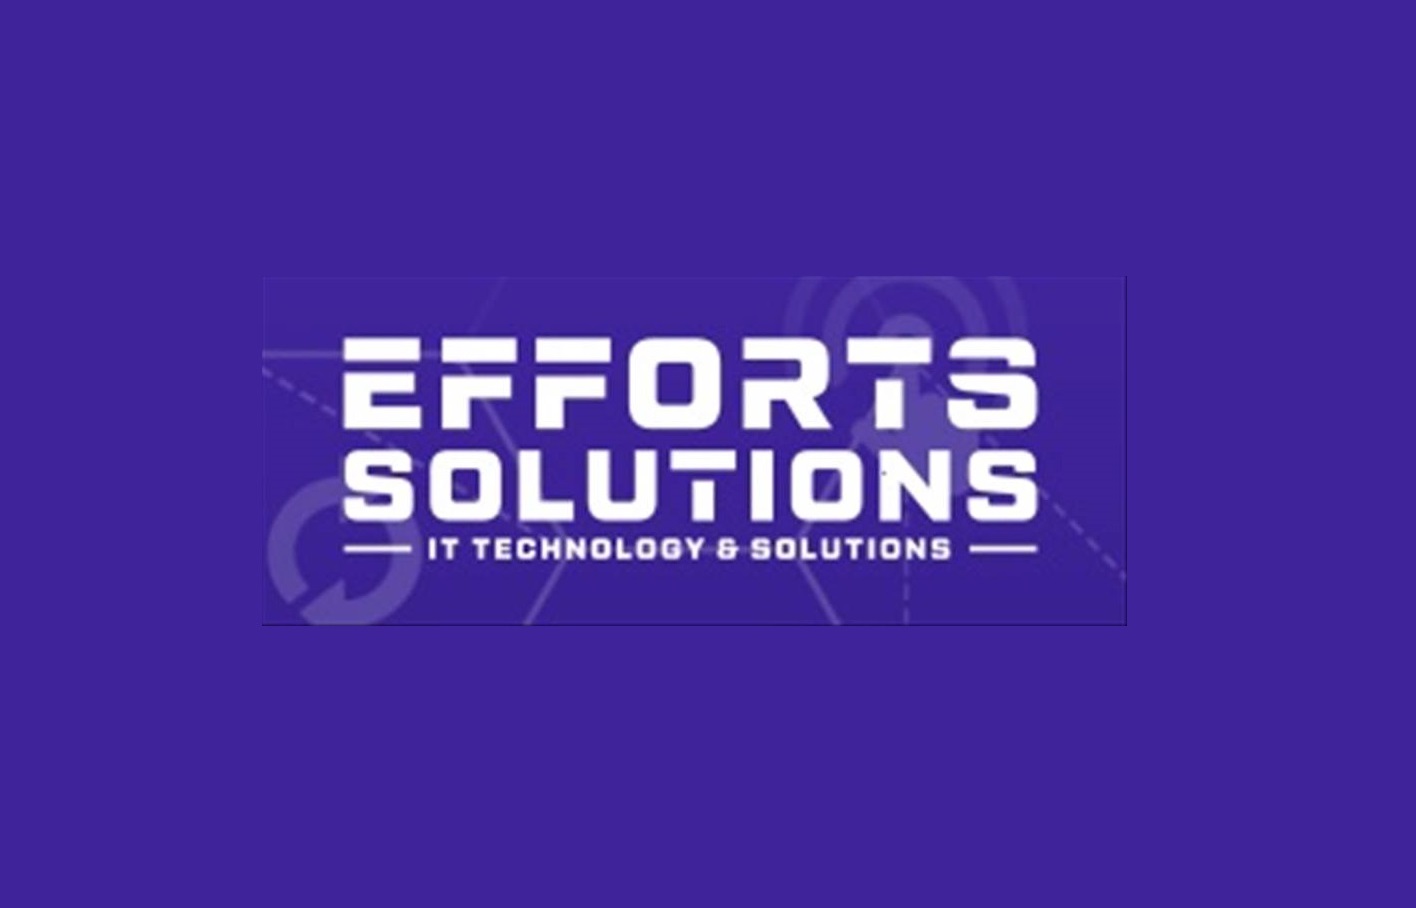 Top IT System Companies in UAE Discover the finest IT companies in UAE, offering cutting-edge technology solutions and services. Explore the top-rated tech firms in the United Arab Emirates for all your IT needs.
For more visit : https://effortz.com/ by effortssolutionsuae